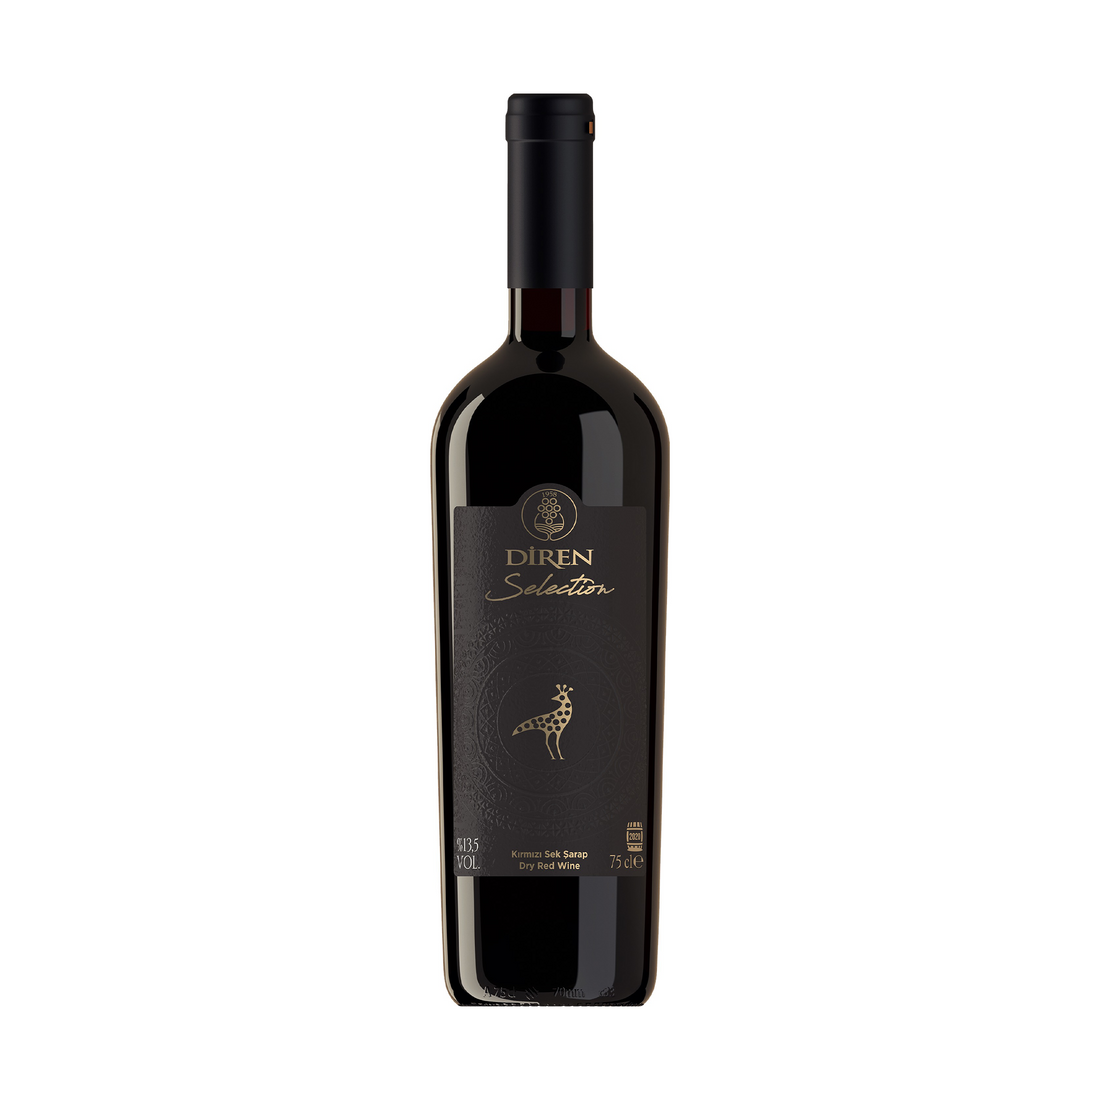 Diren Selection Red 750ml Dry Turkish Red Wine | Diren Selection Kirmizi Sek Sarap | Dry Red Wine